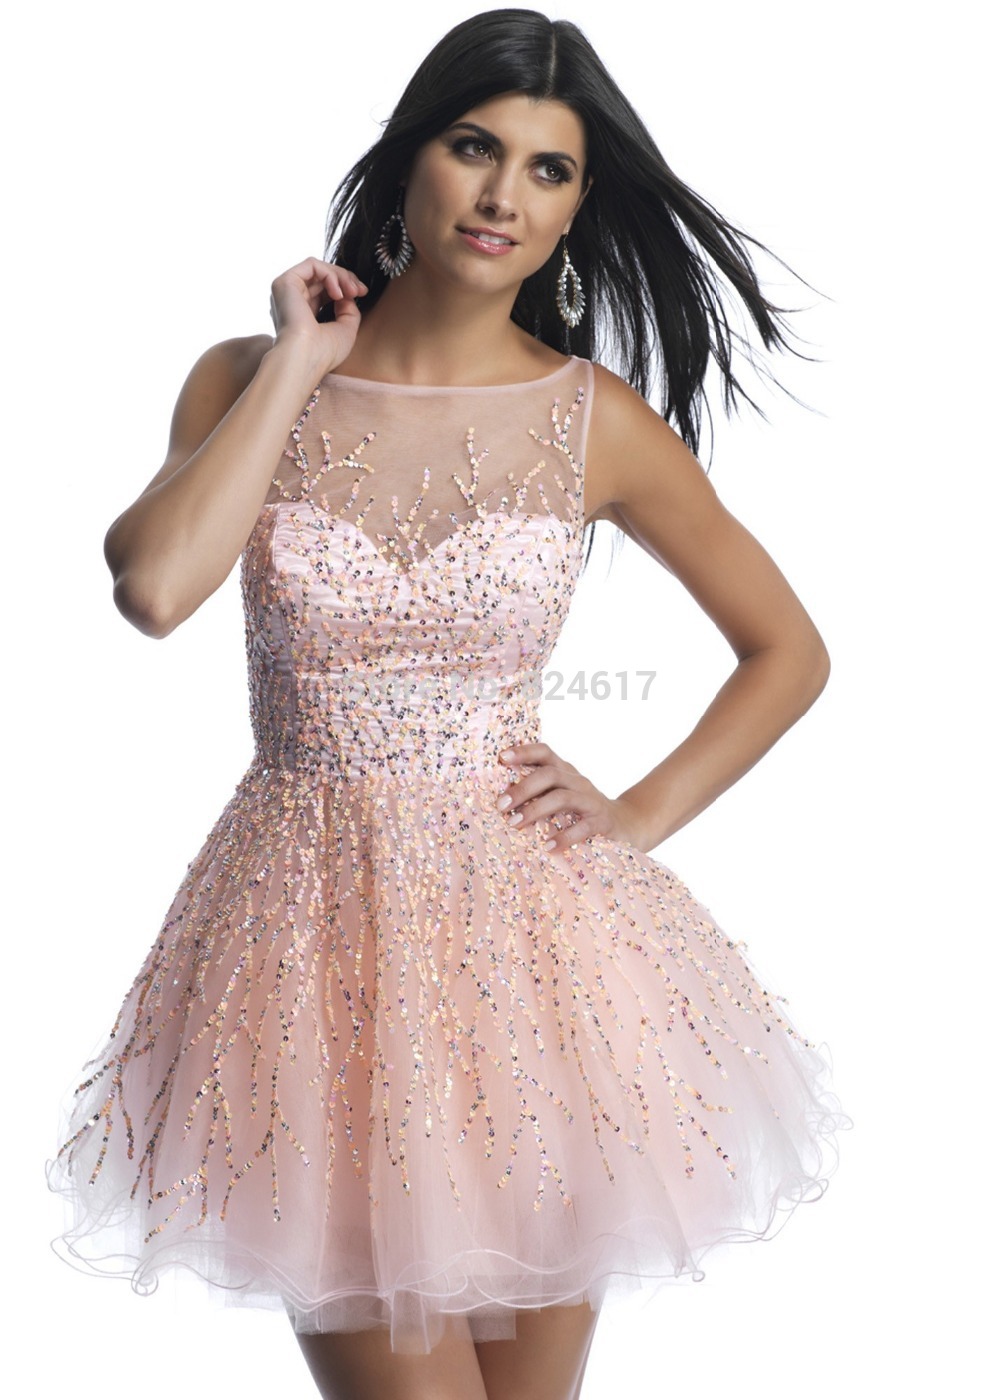 -16-Dresses-Short-Cute-Tulle-High-Neck-Sequin-Pink-Homecoming-Dresses ...